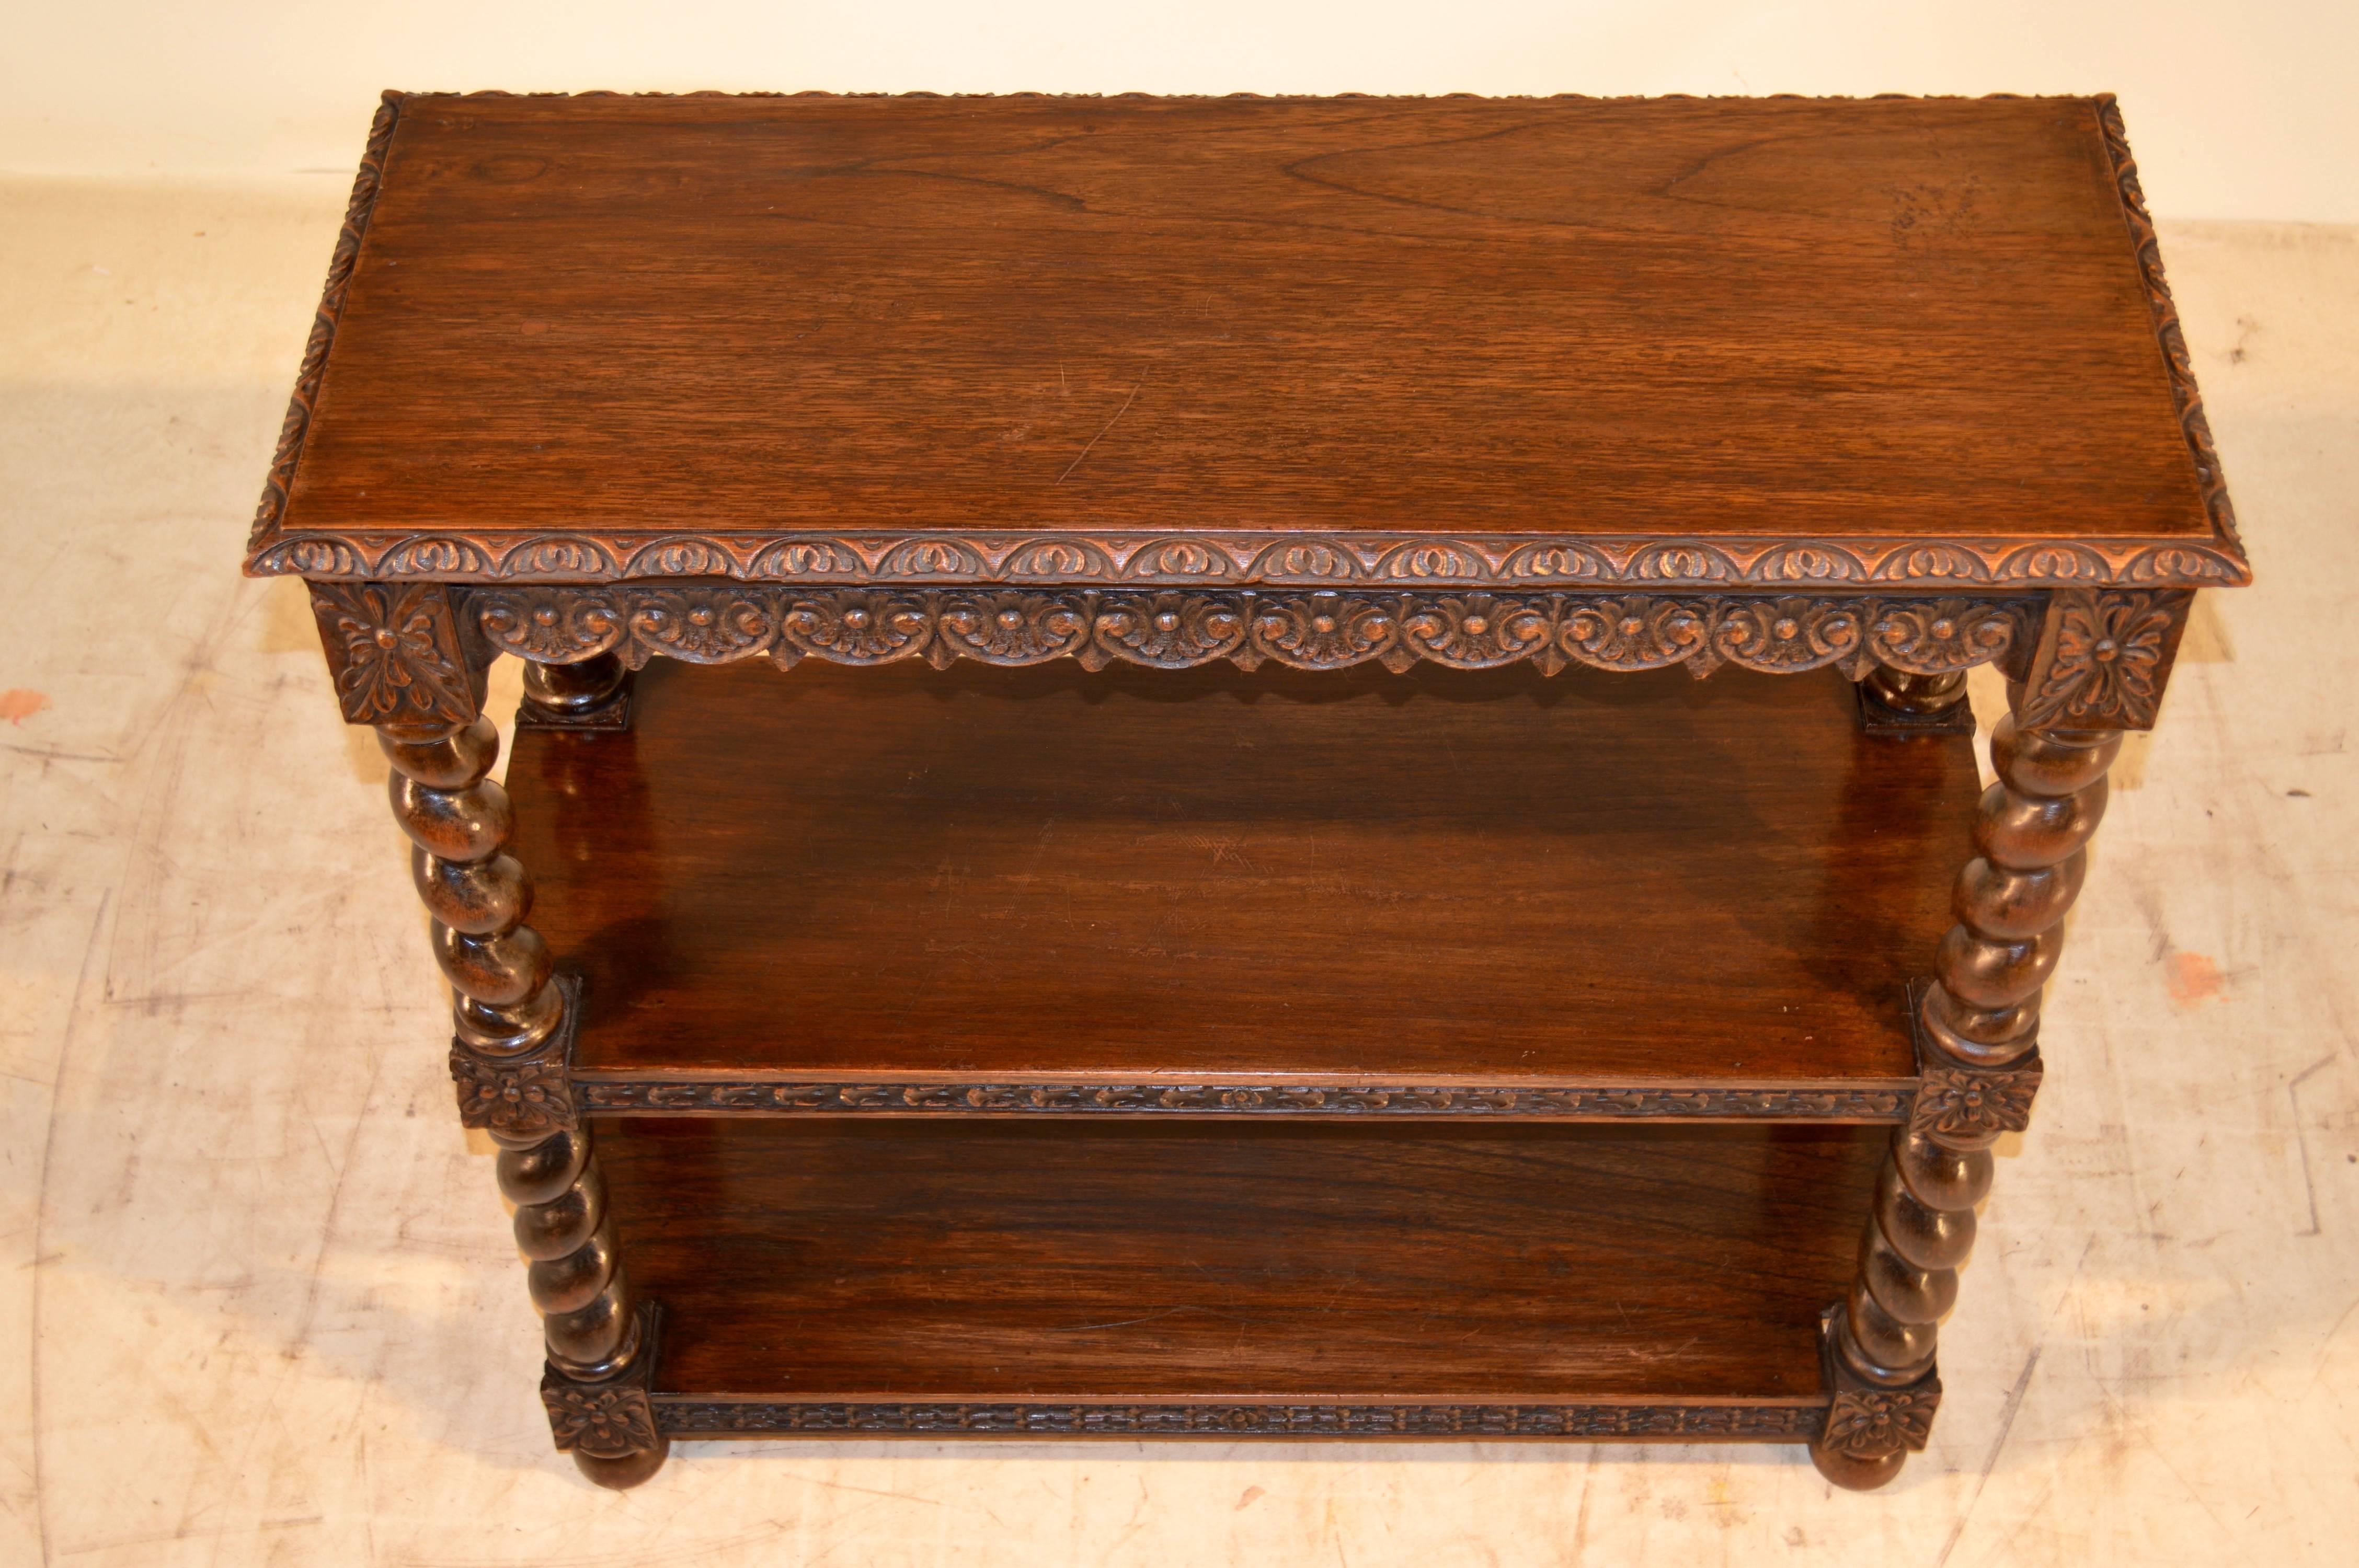 19th century English book shelf with a beveled and gadrooned edge around the top and a carved apron which is on both sides for easy placement in any room. The front of the shelves are carved, and the shelves are separated by thick turned